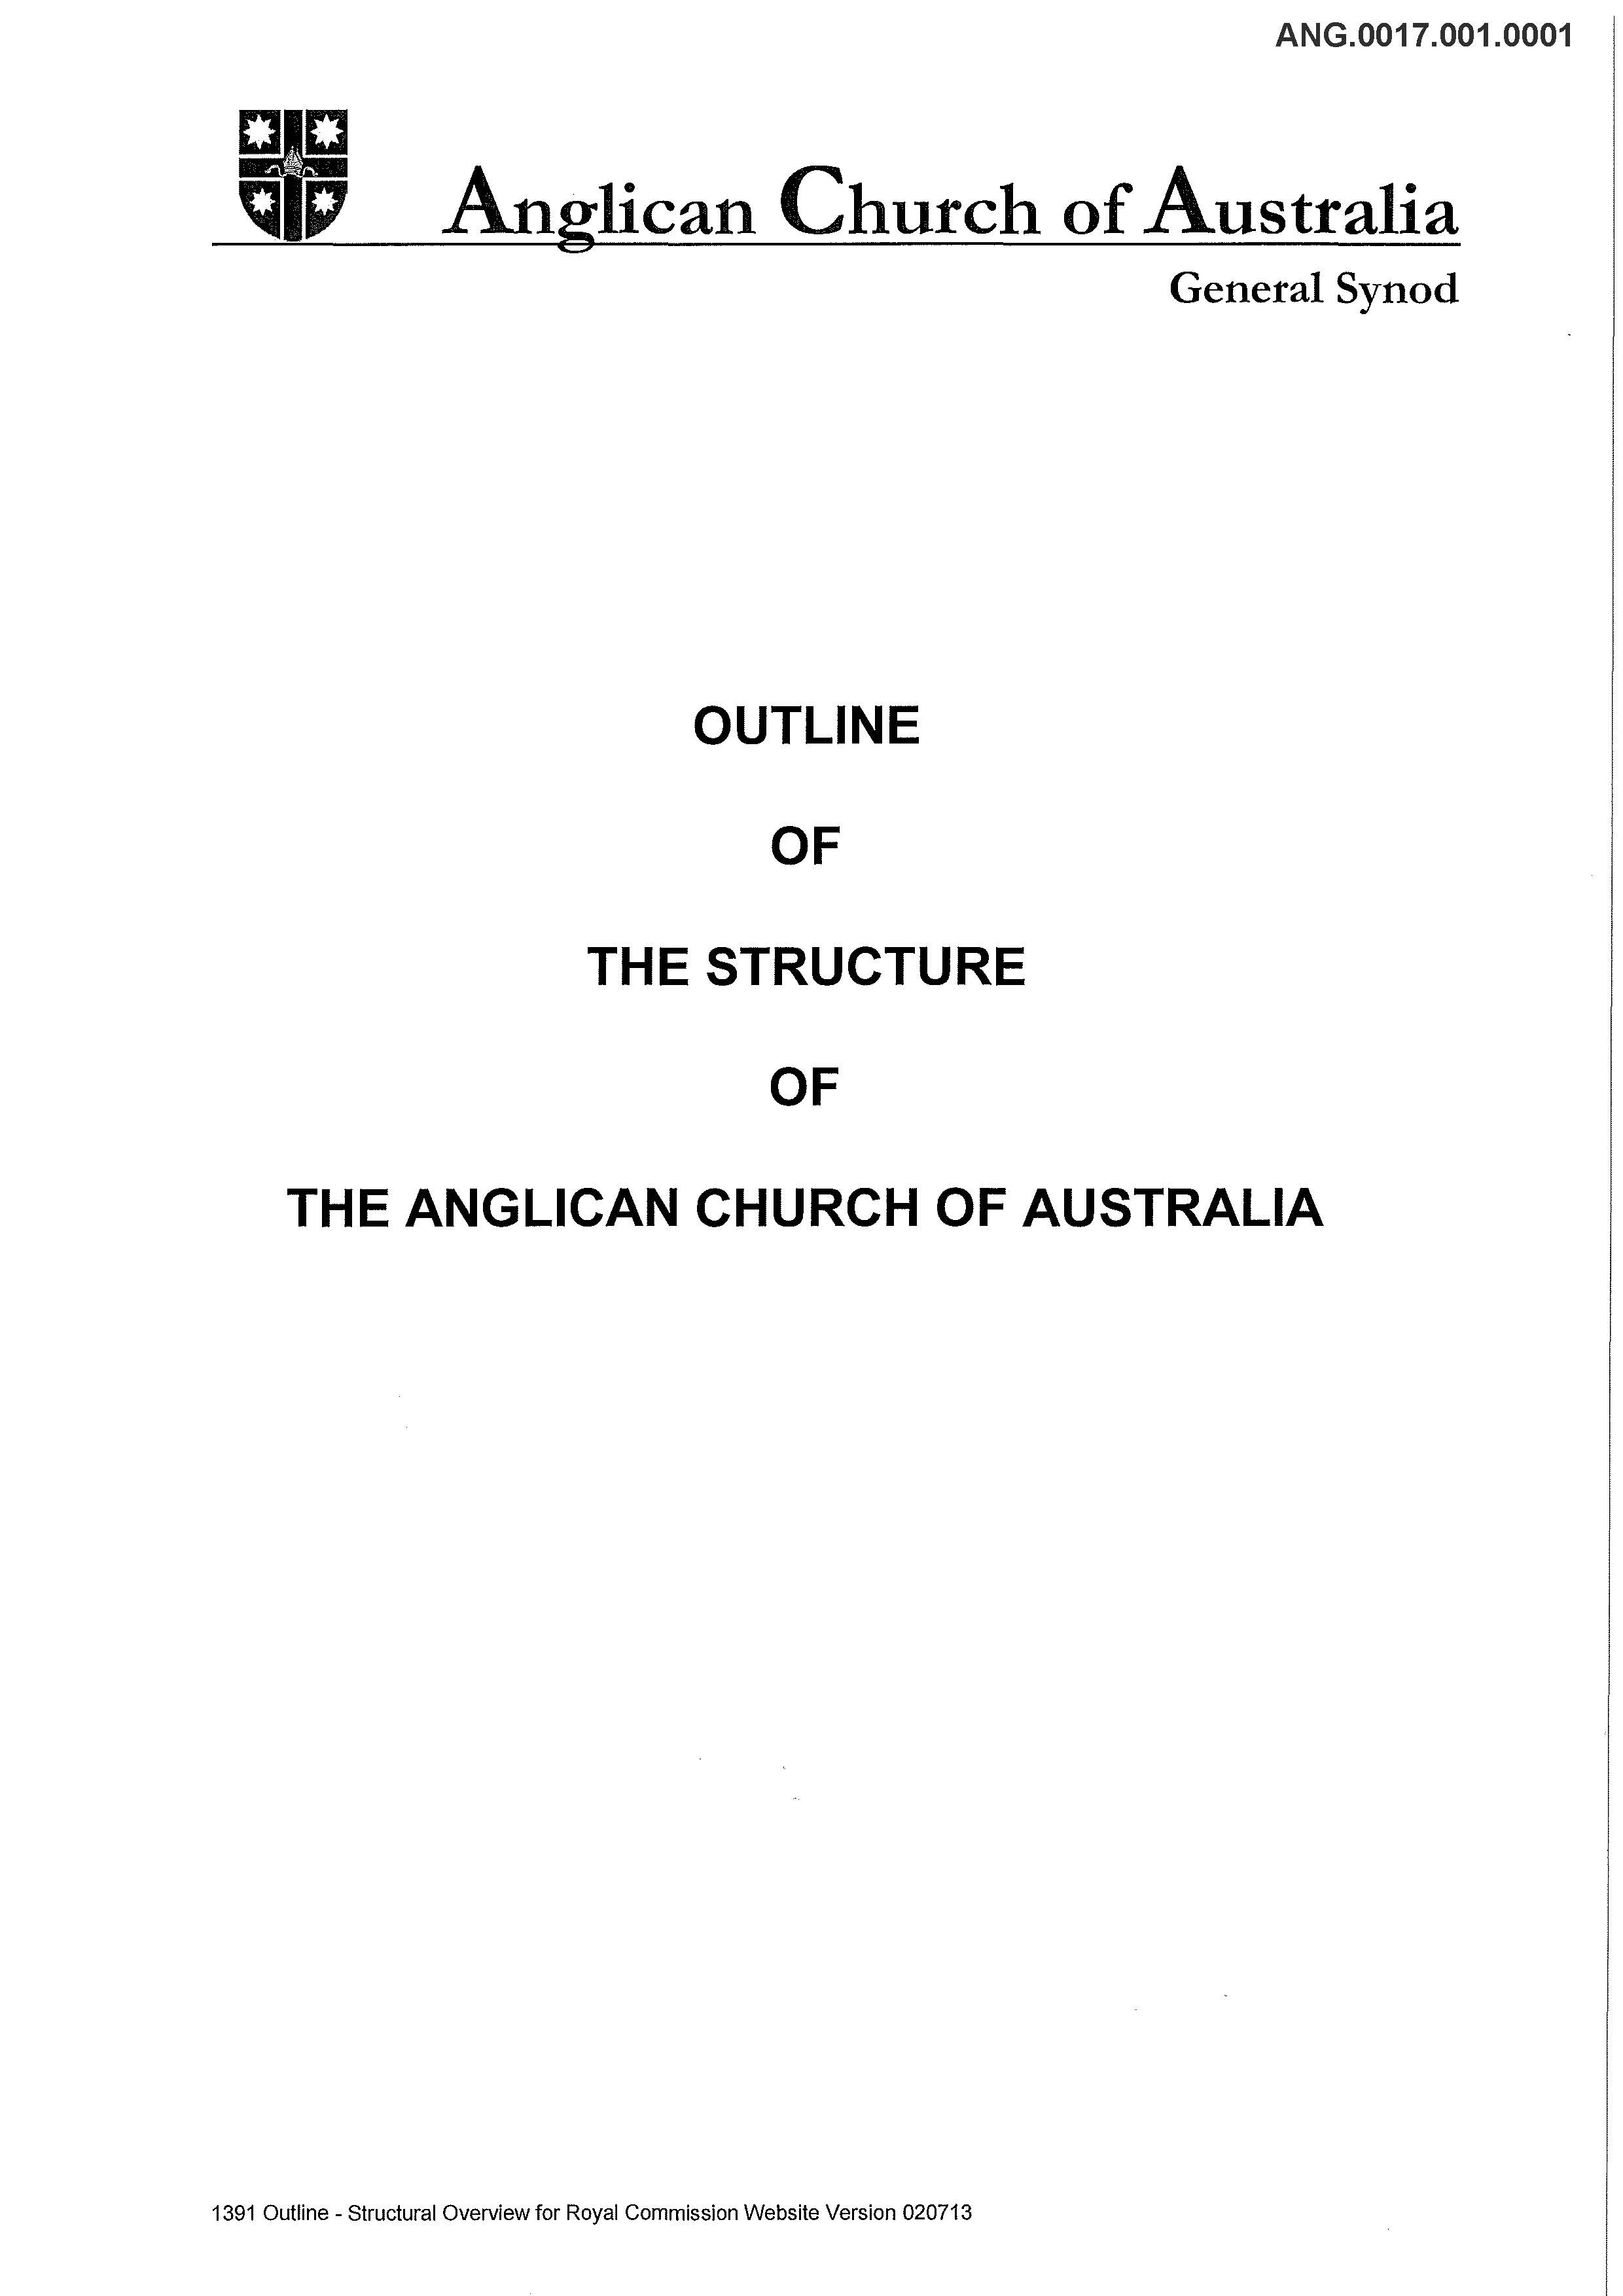 Outline of the structure of the Anglican Church of Australia